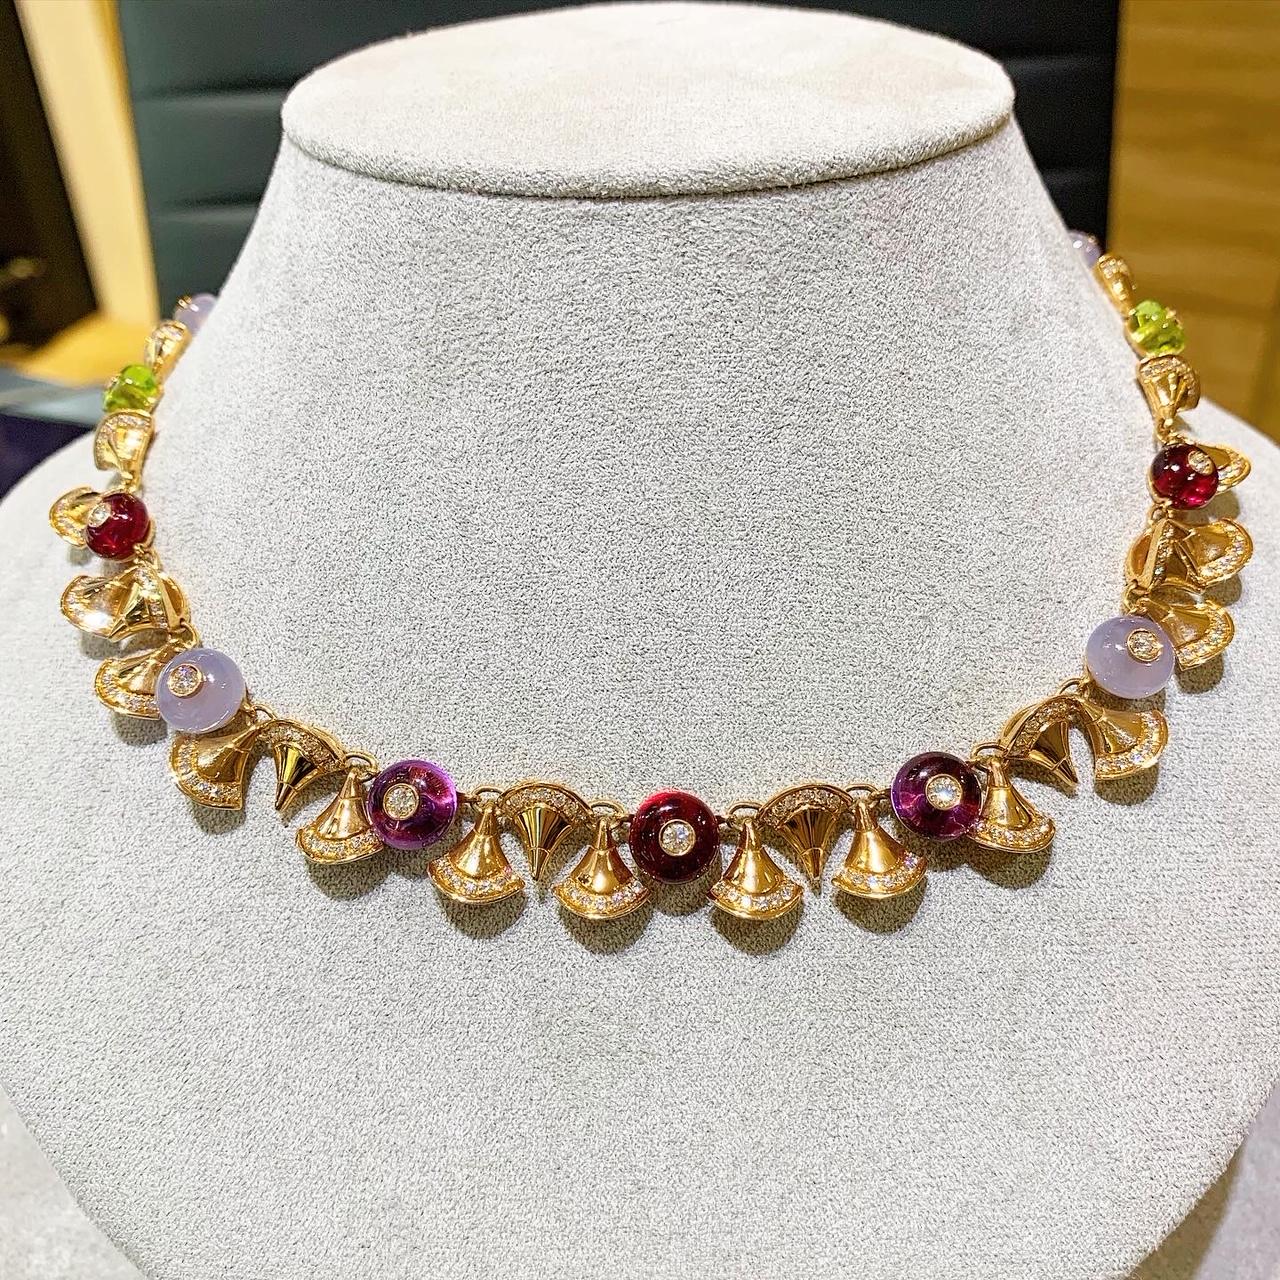 A stunning necklace created by Bvlgari and made in 18k rose gold with cone-shaped gold motifs set with brilliant-cut diamonds, polished amethyst, chalcedony, olivine, and rubelite beads inset with similarly cut diamonds. 
Diamonds estimated to weigh